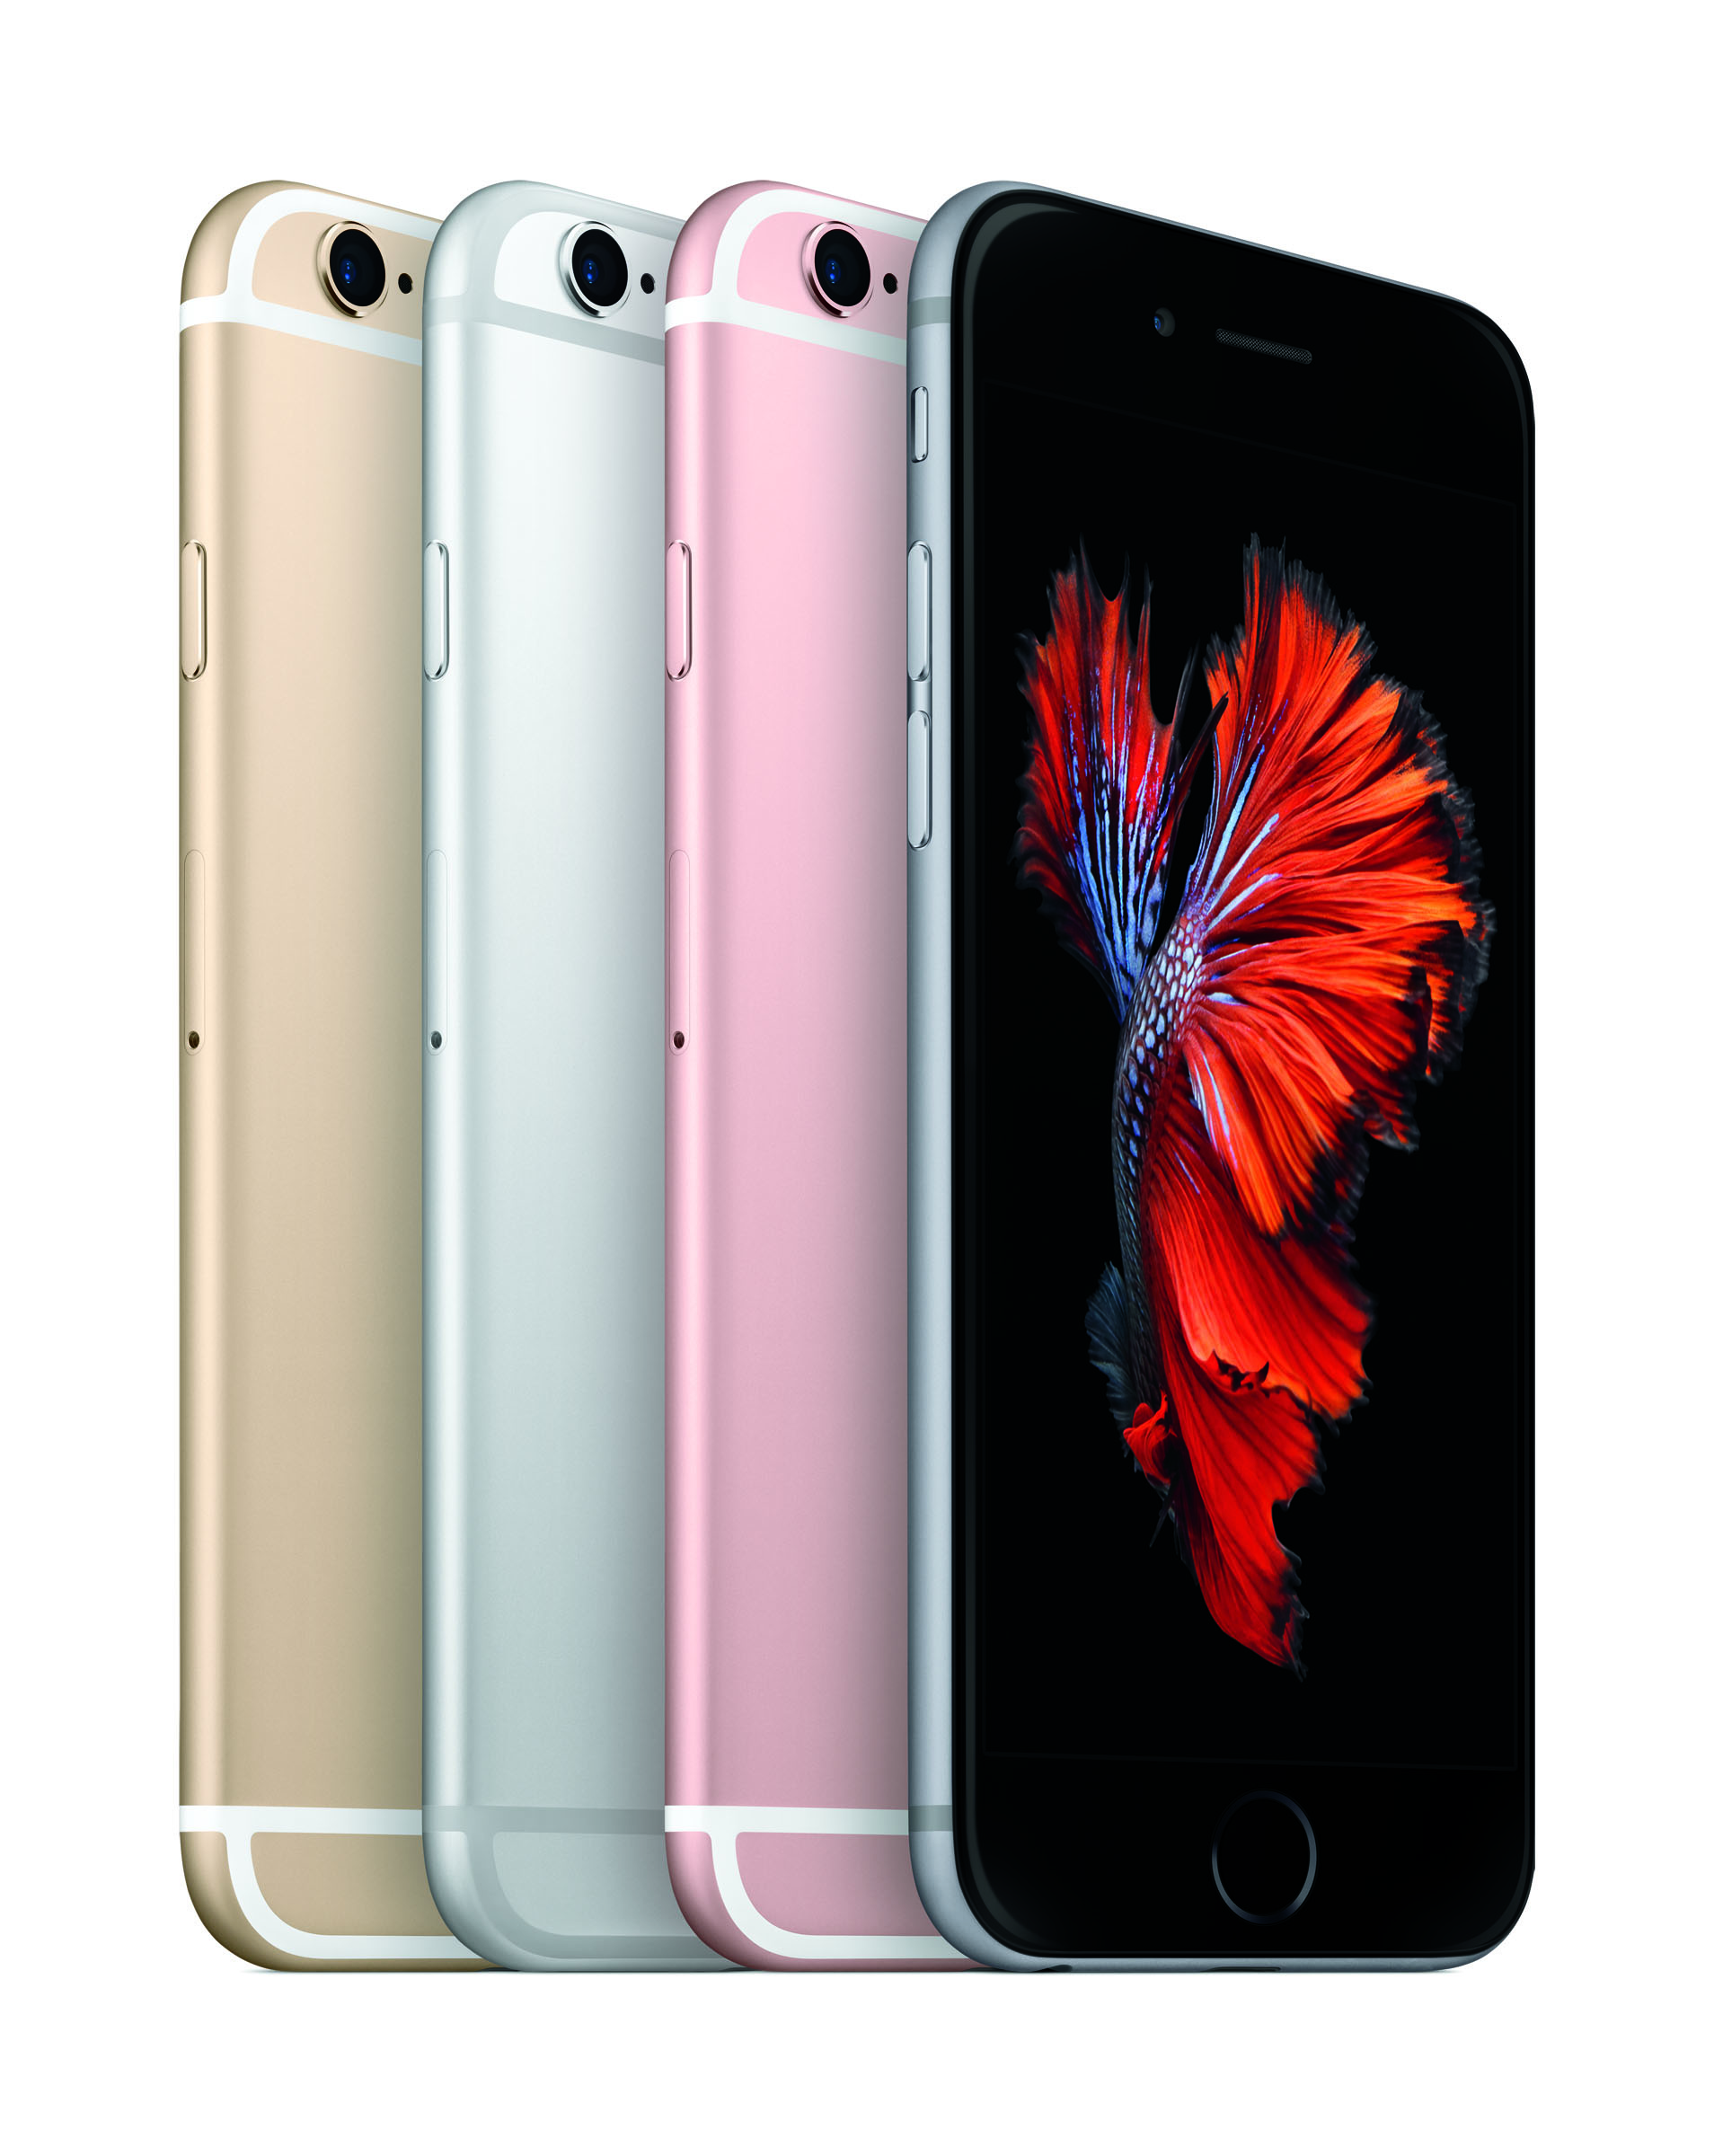 Everything you need to know about the iPhone 6s and 6s Plus